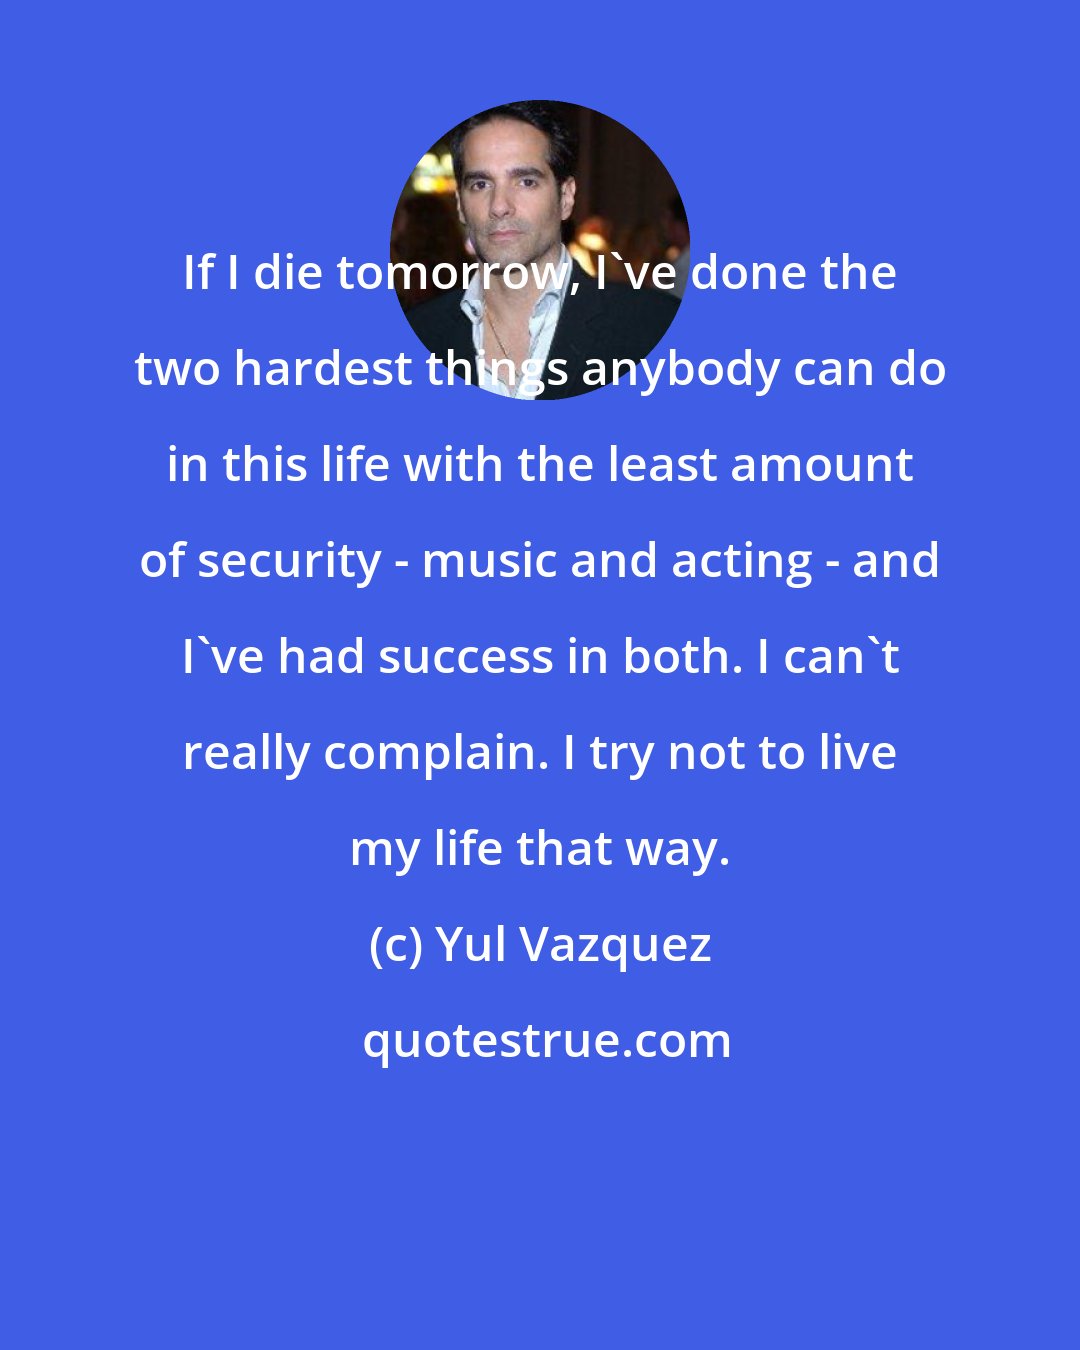 Yul Vazquez: If I die tomorrow, I've done the two hardest things anybody can do in this life with the least amount of security - music and acting - and I've had success in both. I can't really complain. I try not to live my life that way.